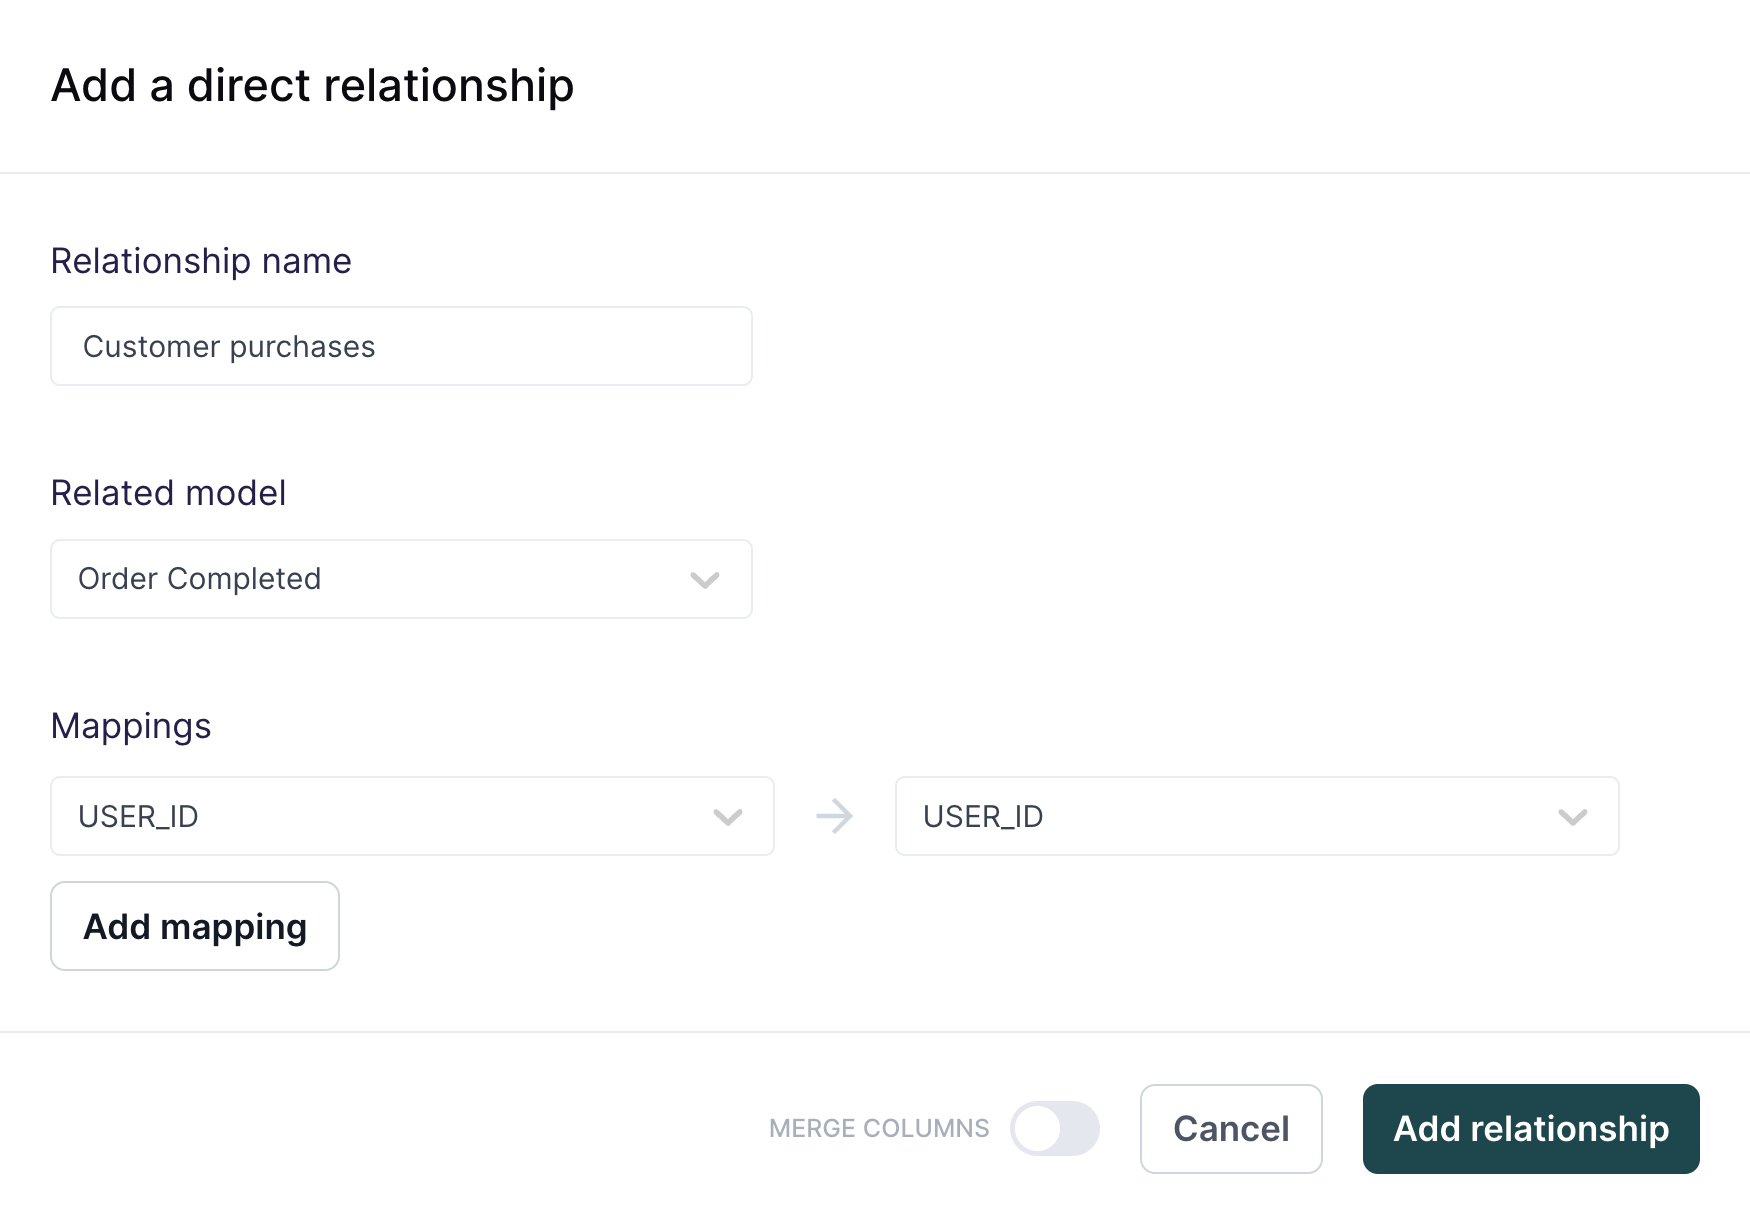 Configuring a direct relationship in the Hightouch UI